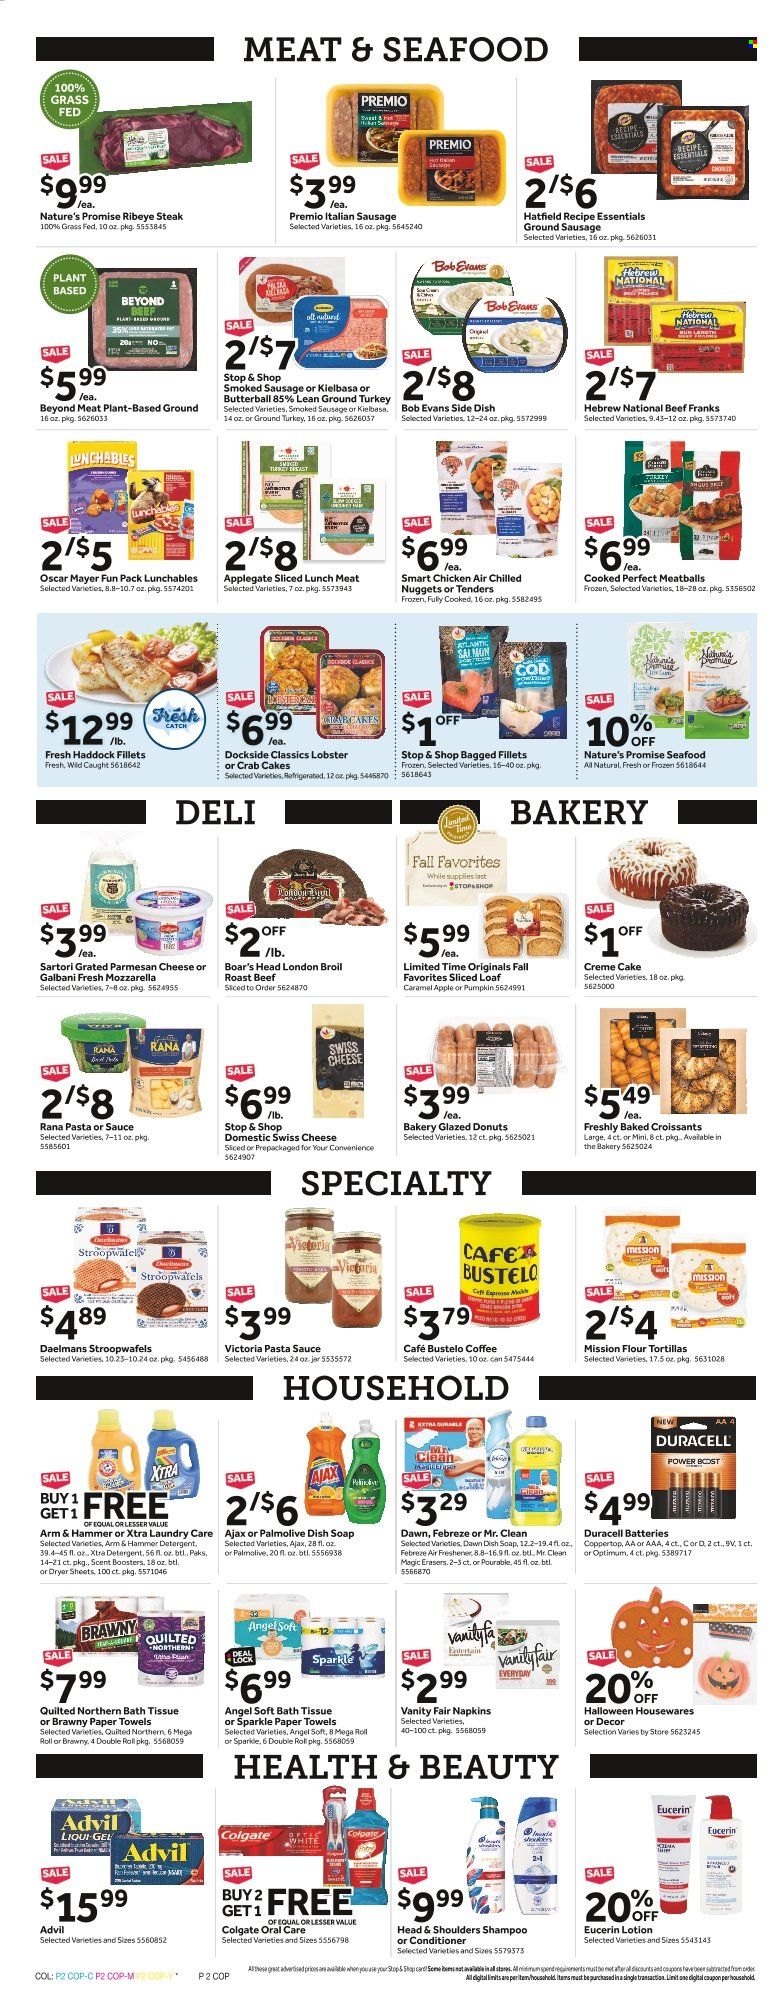 thumbnail - Stop & Shop Flyer - 09/23/2022 - 09/29/2022 - Sales products - bread, tortillas, croissant, Nature’s Promise, flour tortillas, donut, cream pie, snack, Butterball, ground turkey, chicken, turkey, beef steak, steak, roast beef, ribeye steak, Bob Evans, cod, fish fillets, haddock, crab cake, lobster cakes, pasta sauce, meatballs, nuggets, Lunchables, Rana, Boar's Head, ready meal, Oscar Mayer, smoked sausage, kielbasa, frankfurters, lunch meat, swiss cheese, parmesan, cheese, grated cheese, Galbani, Halloween, ARM & HAMMER, Boost, coffee, bath tissue, Quilted Northern, kitchen towels, paper towels, detergent, Febreze, cleaner, Ajax, dryer sheets, scent booster, dishwashing liquid, shampoo, Palmolive, Colgate, conditioner, Head & Shoulders, Eucerin, houseware, pin, eraser, air freshener, battery, Duracell, aa batteries, Optimum, Advil Rapid. Page 2.